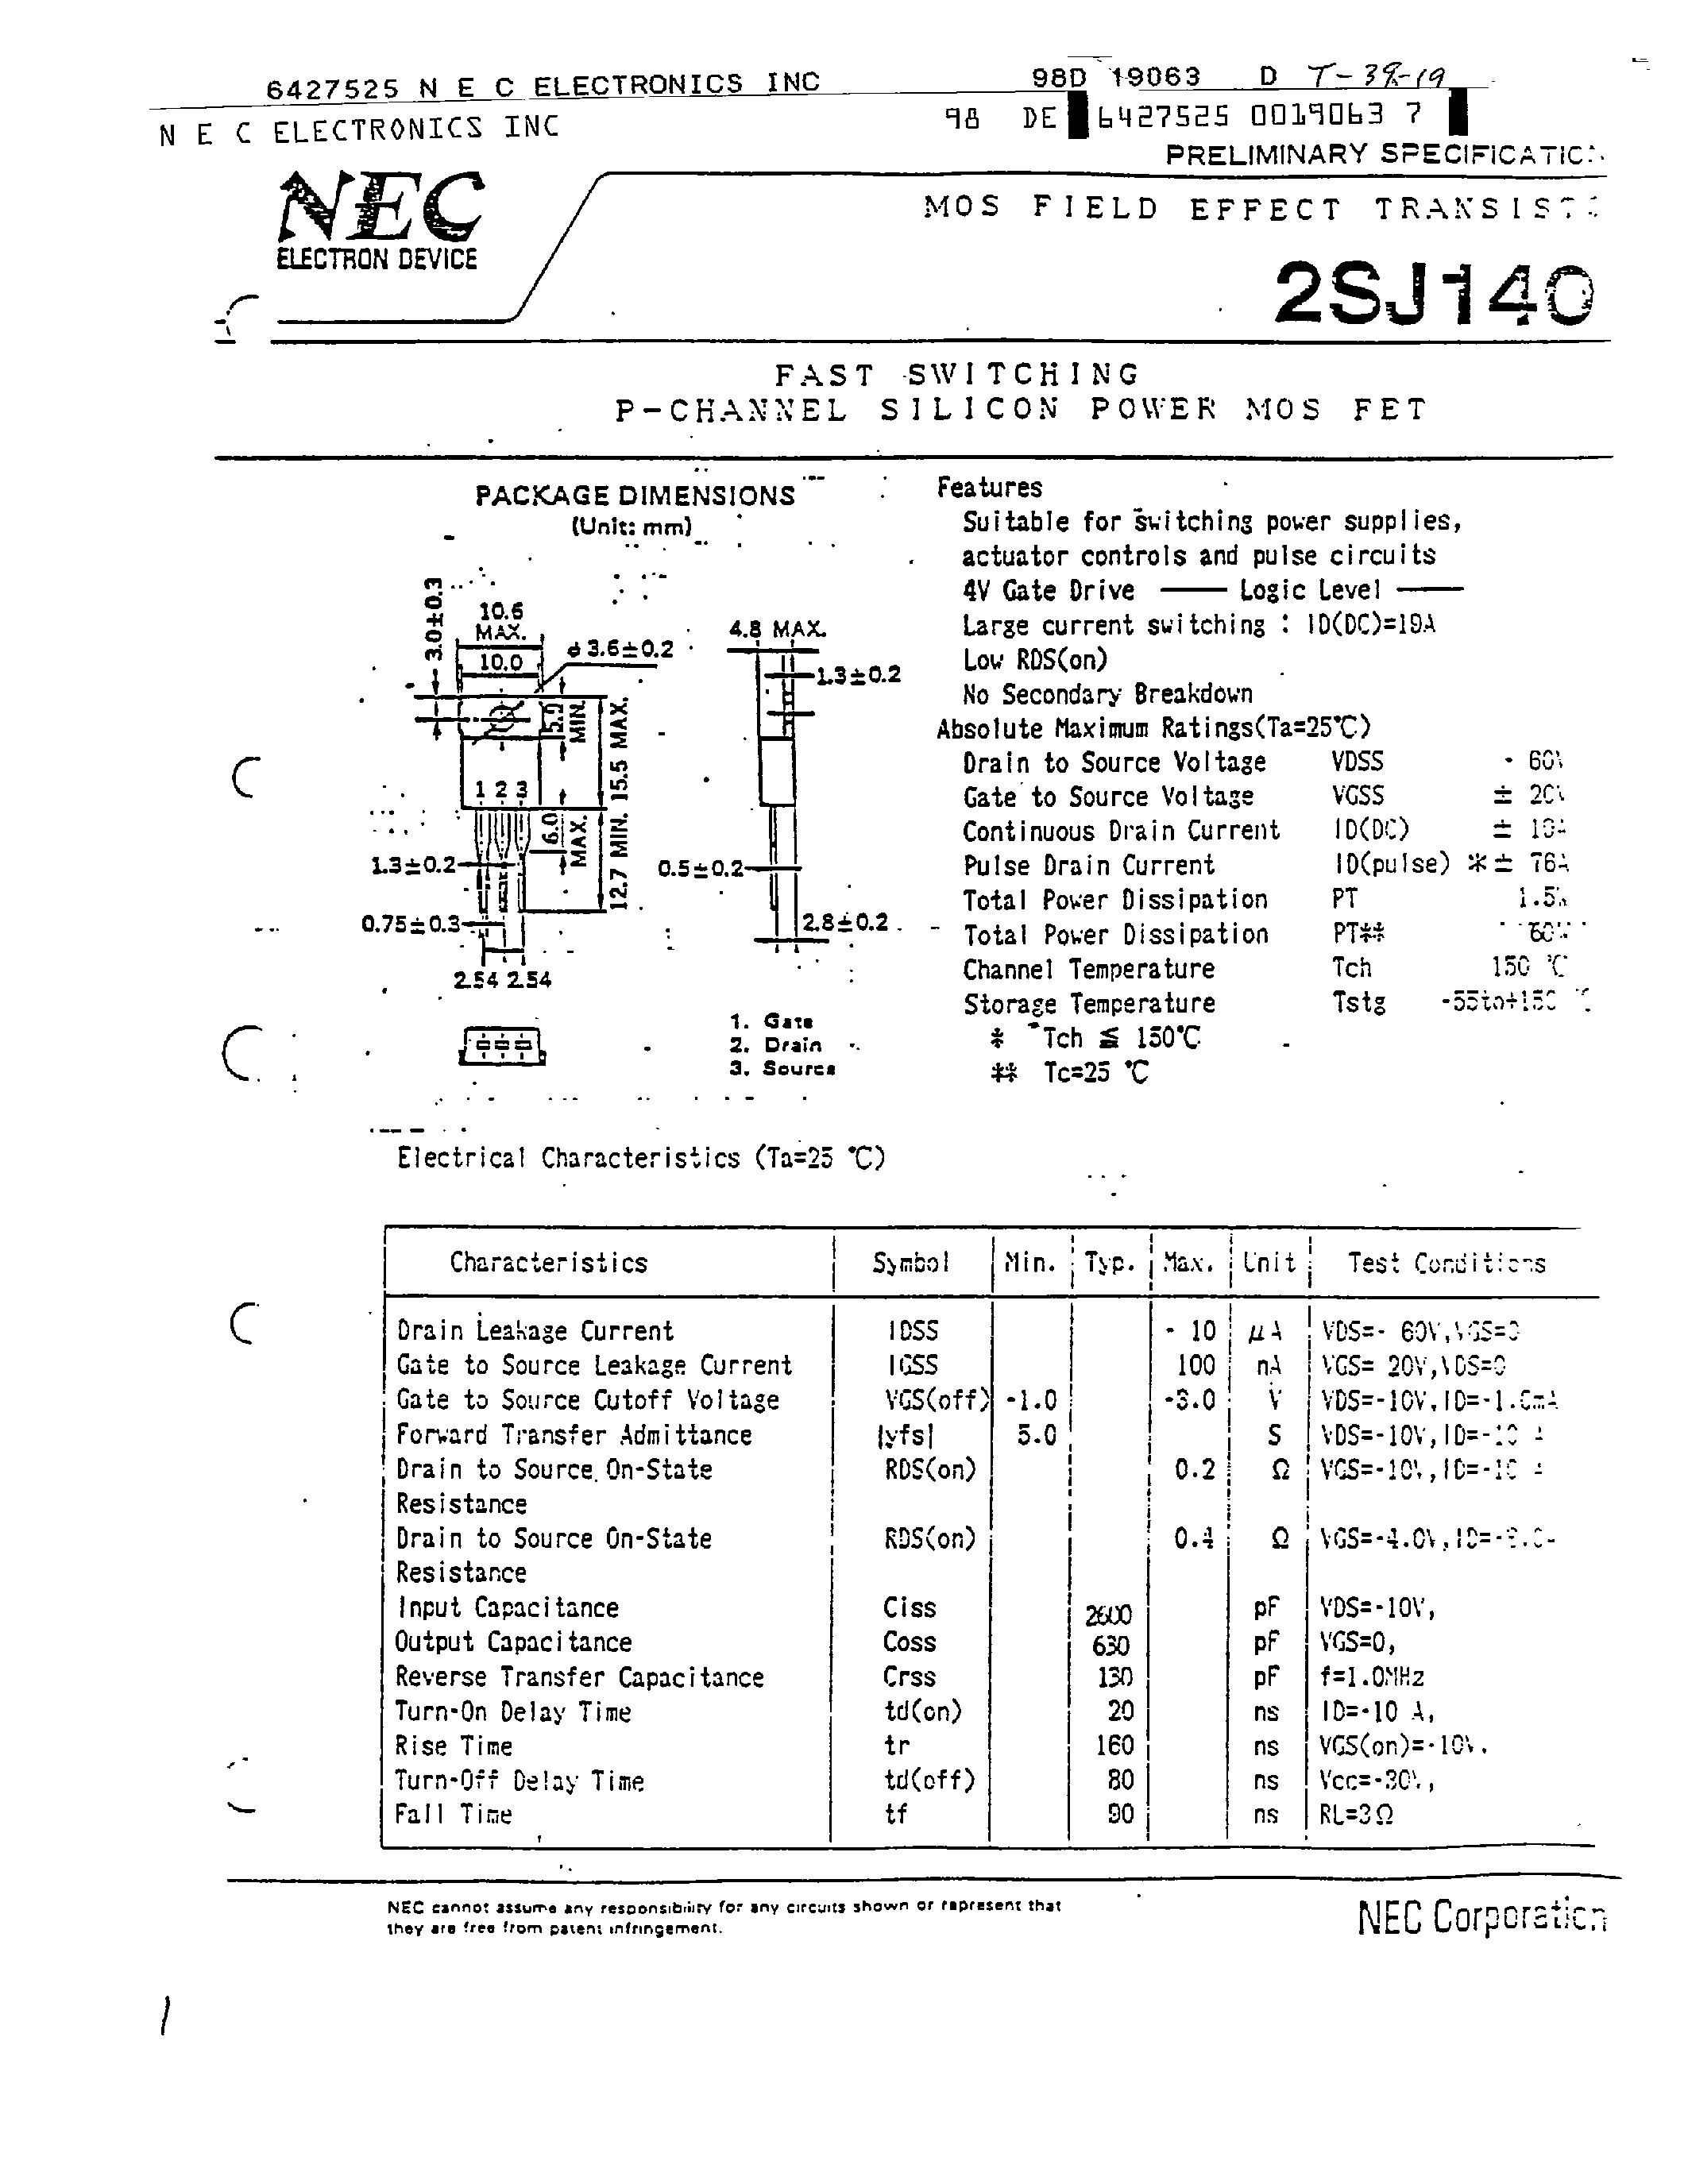 Datasheet 2SJ140 - FAST SWITCHING P - CHANNEL SILICON POWER MOS FET page 1